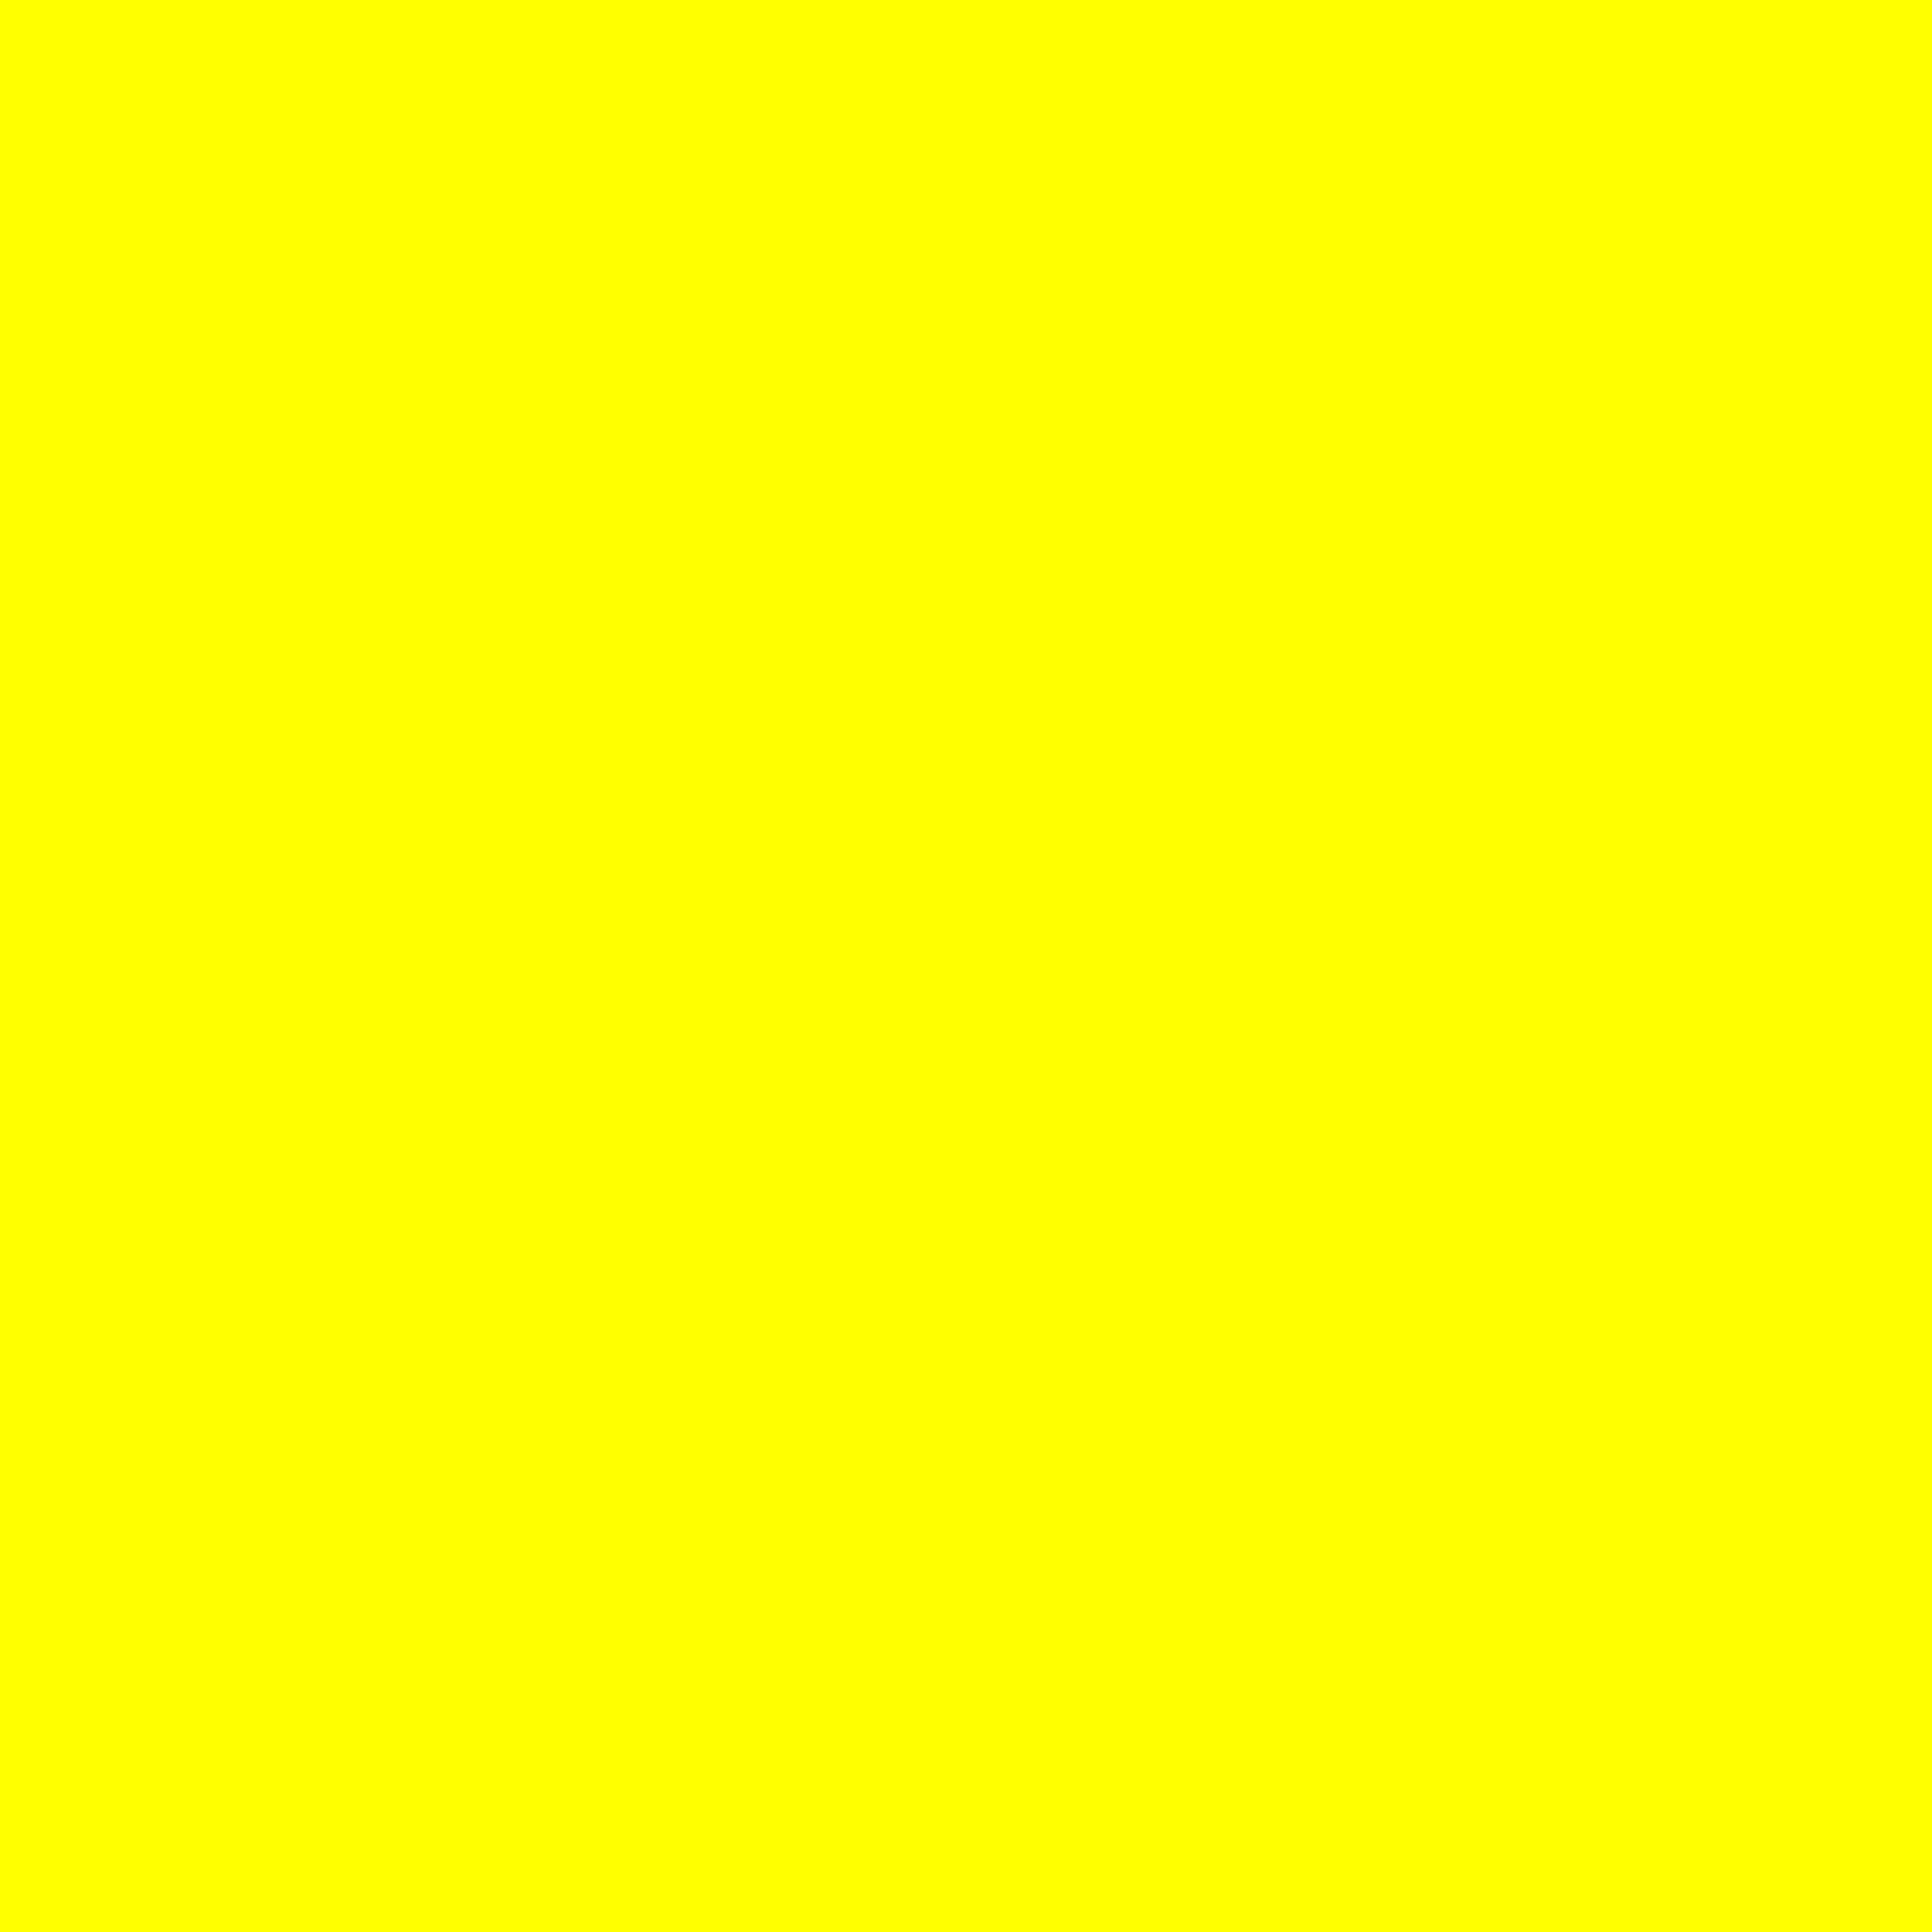 0ff color square yellow clip art sweet png